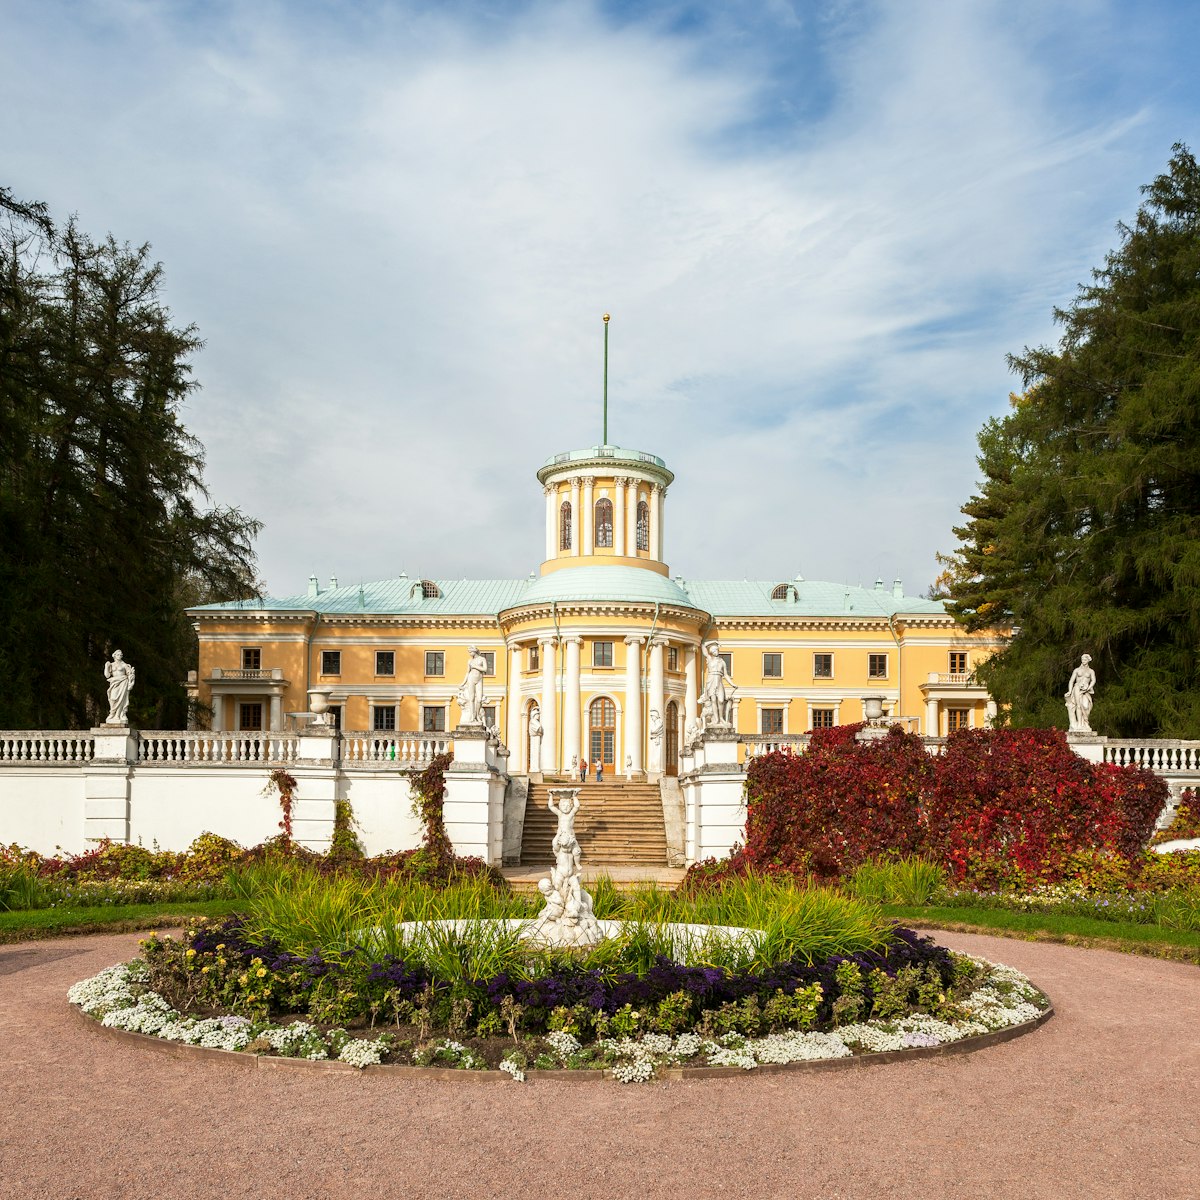 Arkhangelskoye - unique monument of Russian architecture of the manor, located 20 kilometers northwest of Moscow.